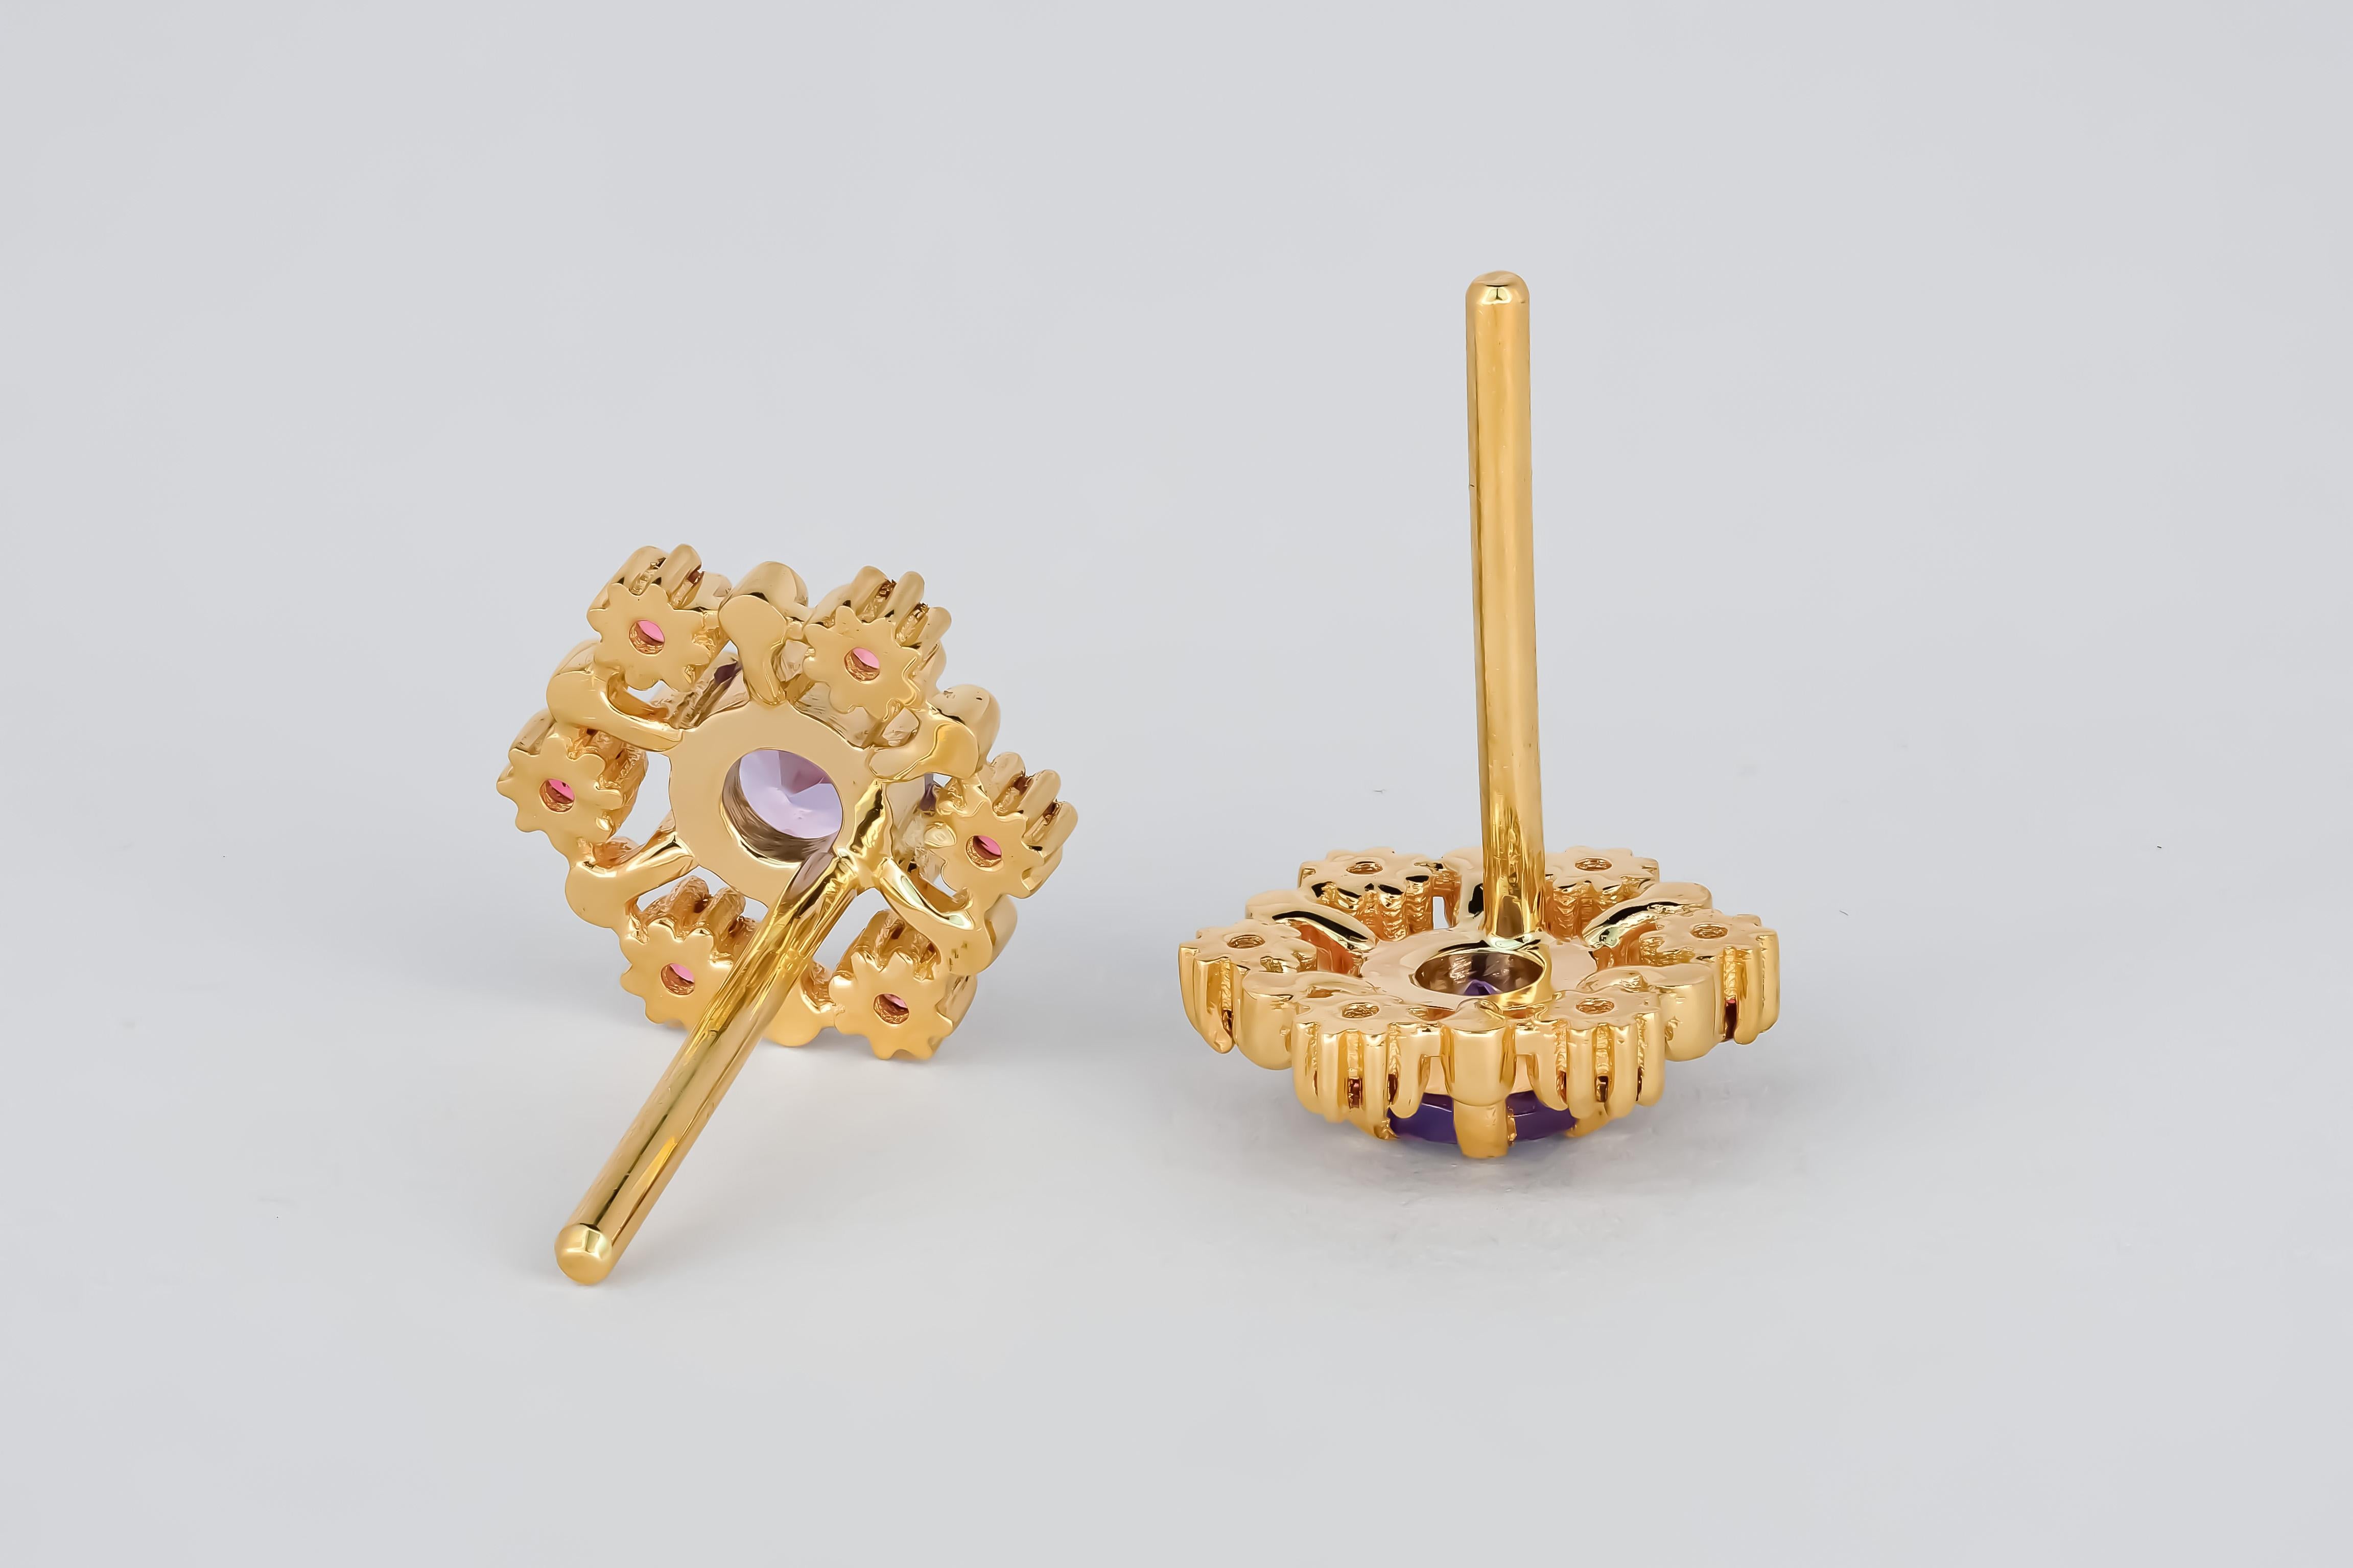 14k gold earrings studs with tanzanites and rubies

metal: 14k gold 
weight: 1.9 gr
size: 10x10mm
set with tanzanites: blue color, round cut, clarity good - small inclusions, 0.45x2=0.90 ct total
rubies: 12 pieces, round cut, red color, transparent